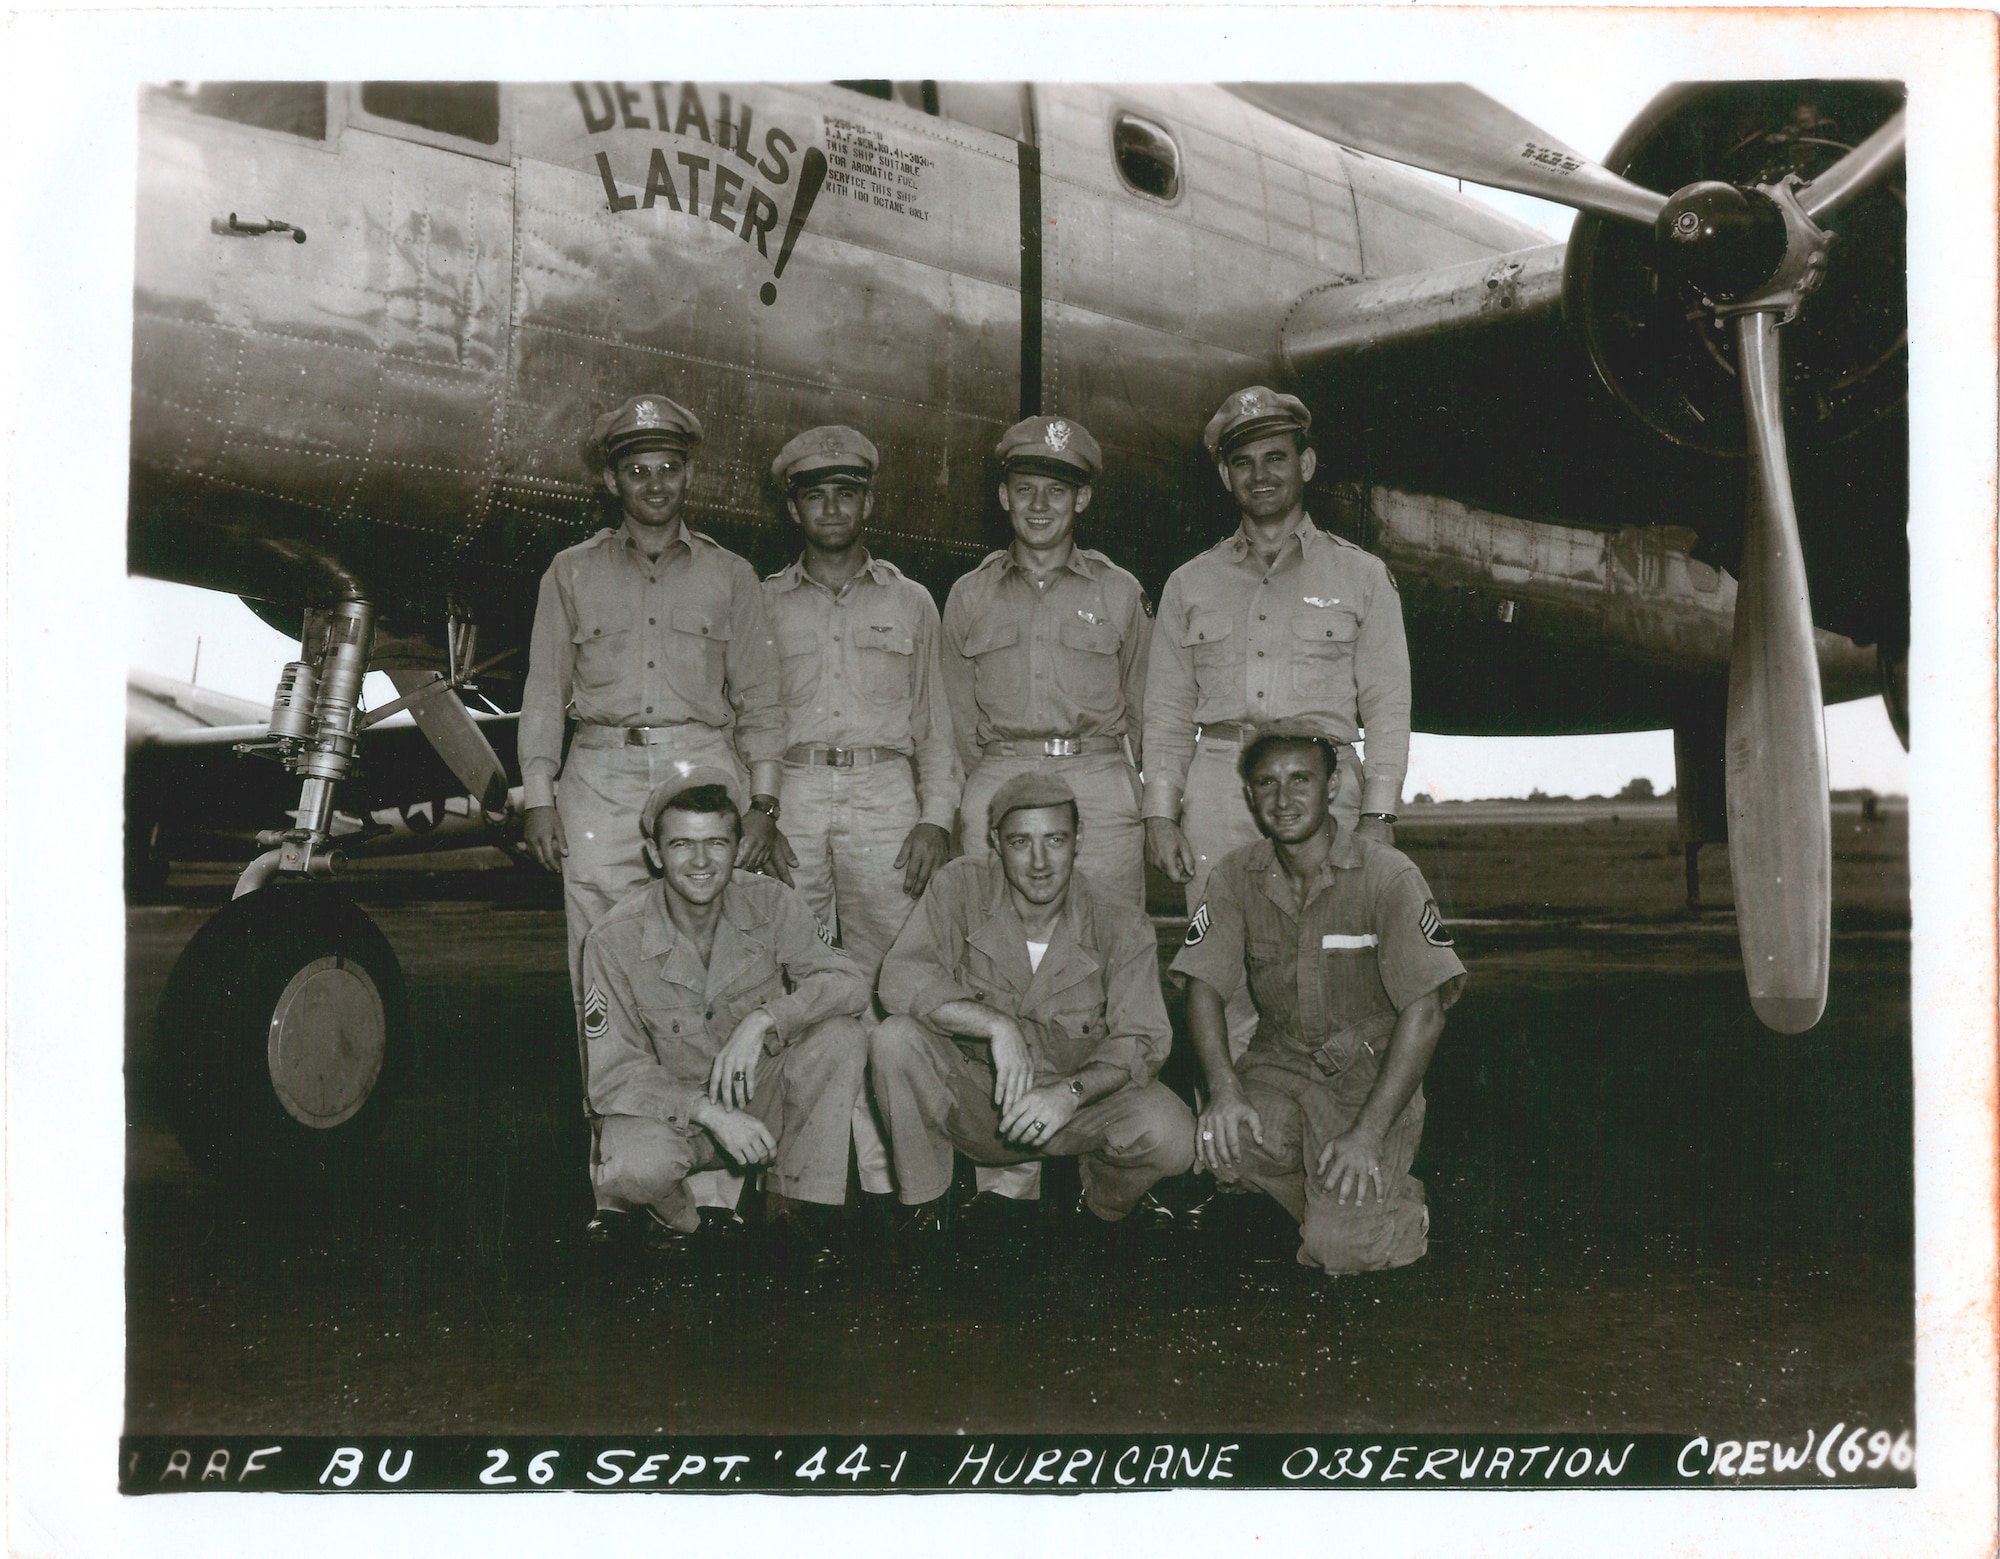 Crew of Details Later!, one of the two B-25s of the Hurricane Reconnaissance Unit at Morrison Field. Capt. Allen C. Wiggins, pilot, is at the end right, back row, and Capt. Billy B. Boothe, navigator, second from the left on the back row. The aircrew consisted of a pilot, co-pilot, navigator, meterologist, radio operator, engineer, and crew chief. (Official U.S. Army Air Force photo)